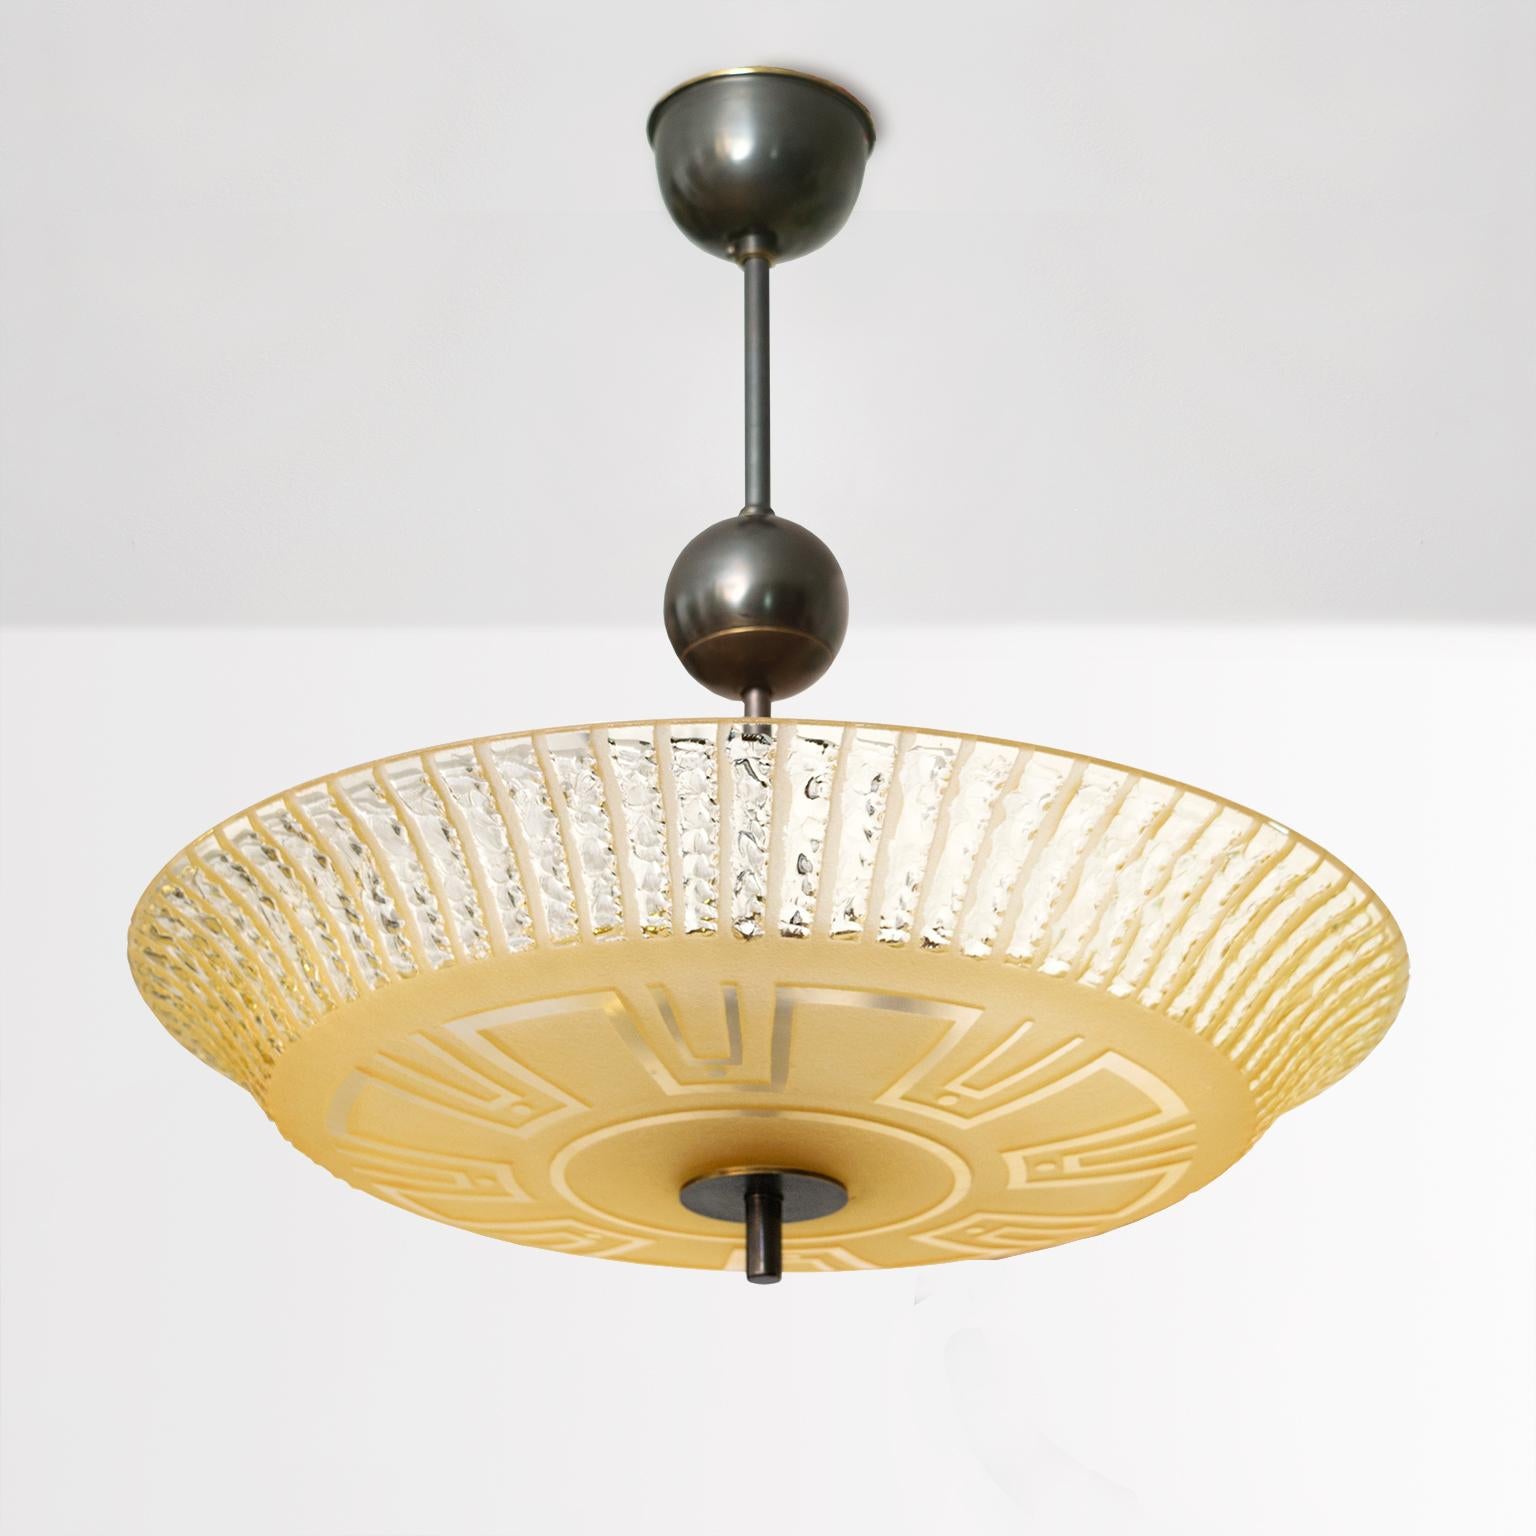 Scandinavian Modern, Swedish Art Deco hand and acid etched pale amber glass shade with Meander pattern, made by Orrefors. The brass canopy, stem and finial are all custom patinated, newly rewired with 3 standard base sockets for use in the USA .